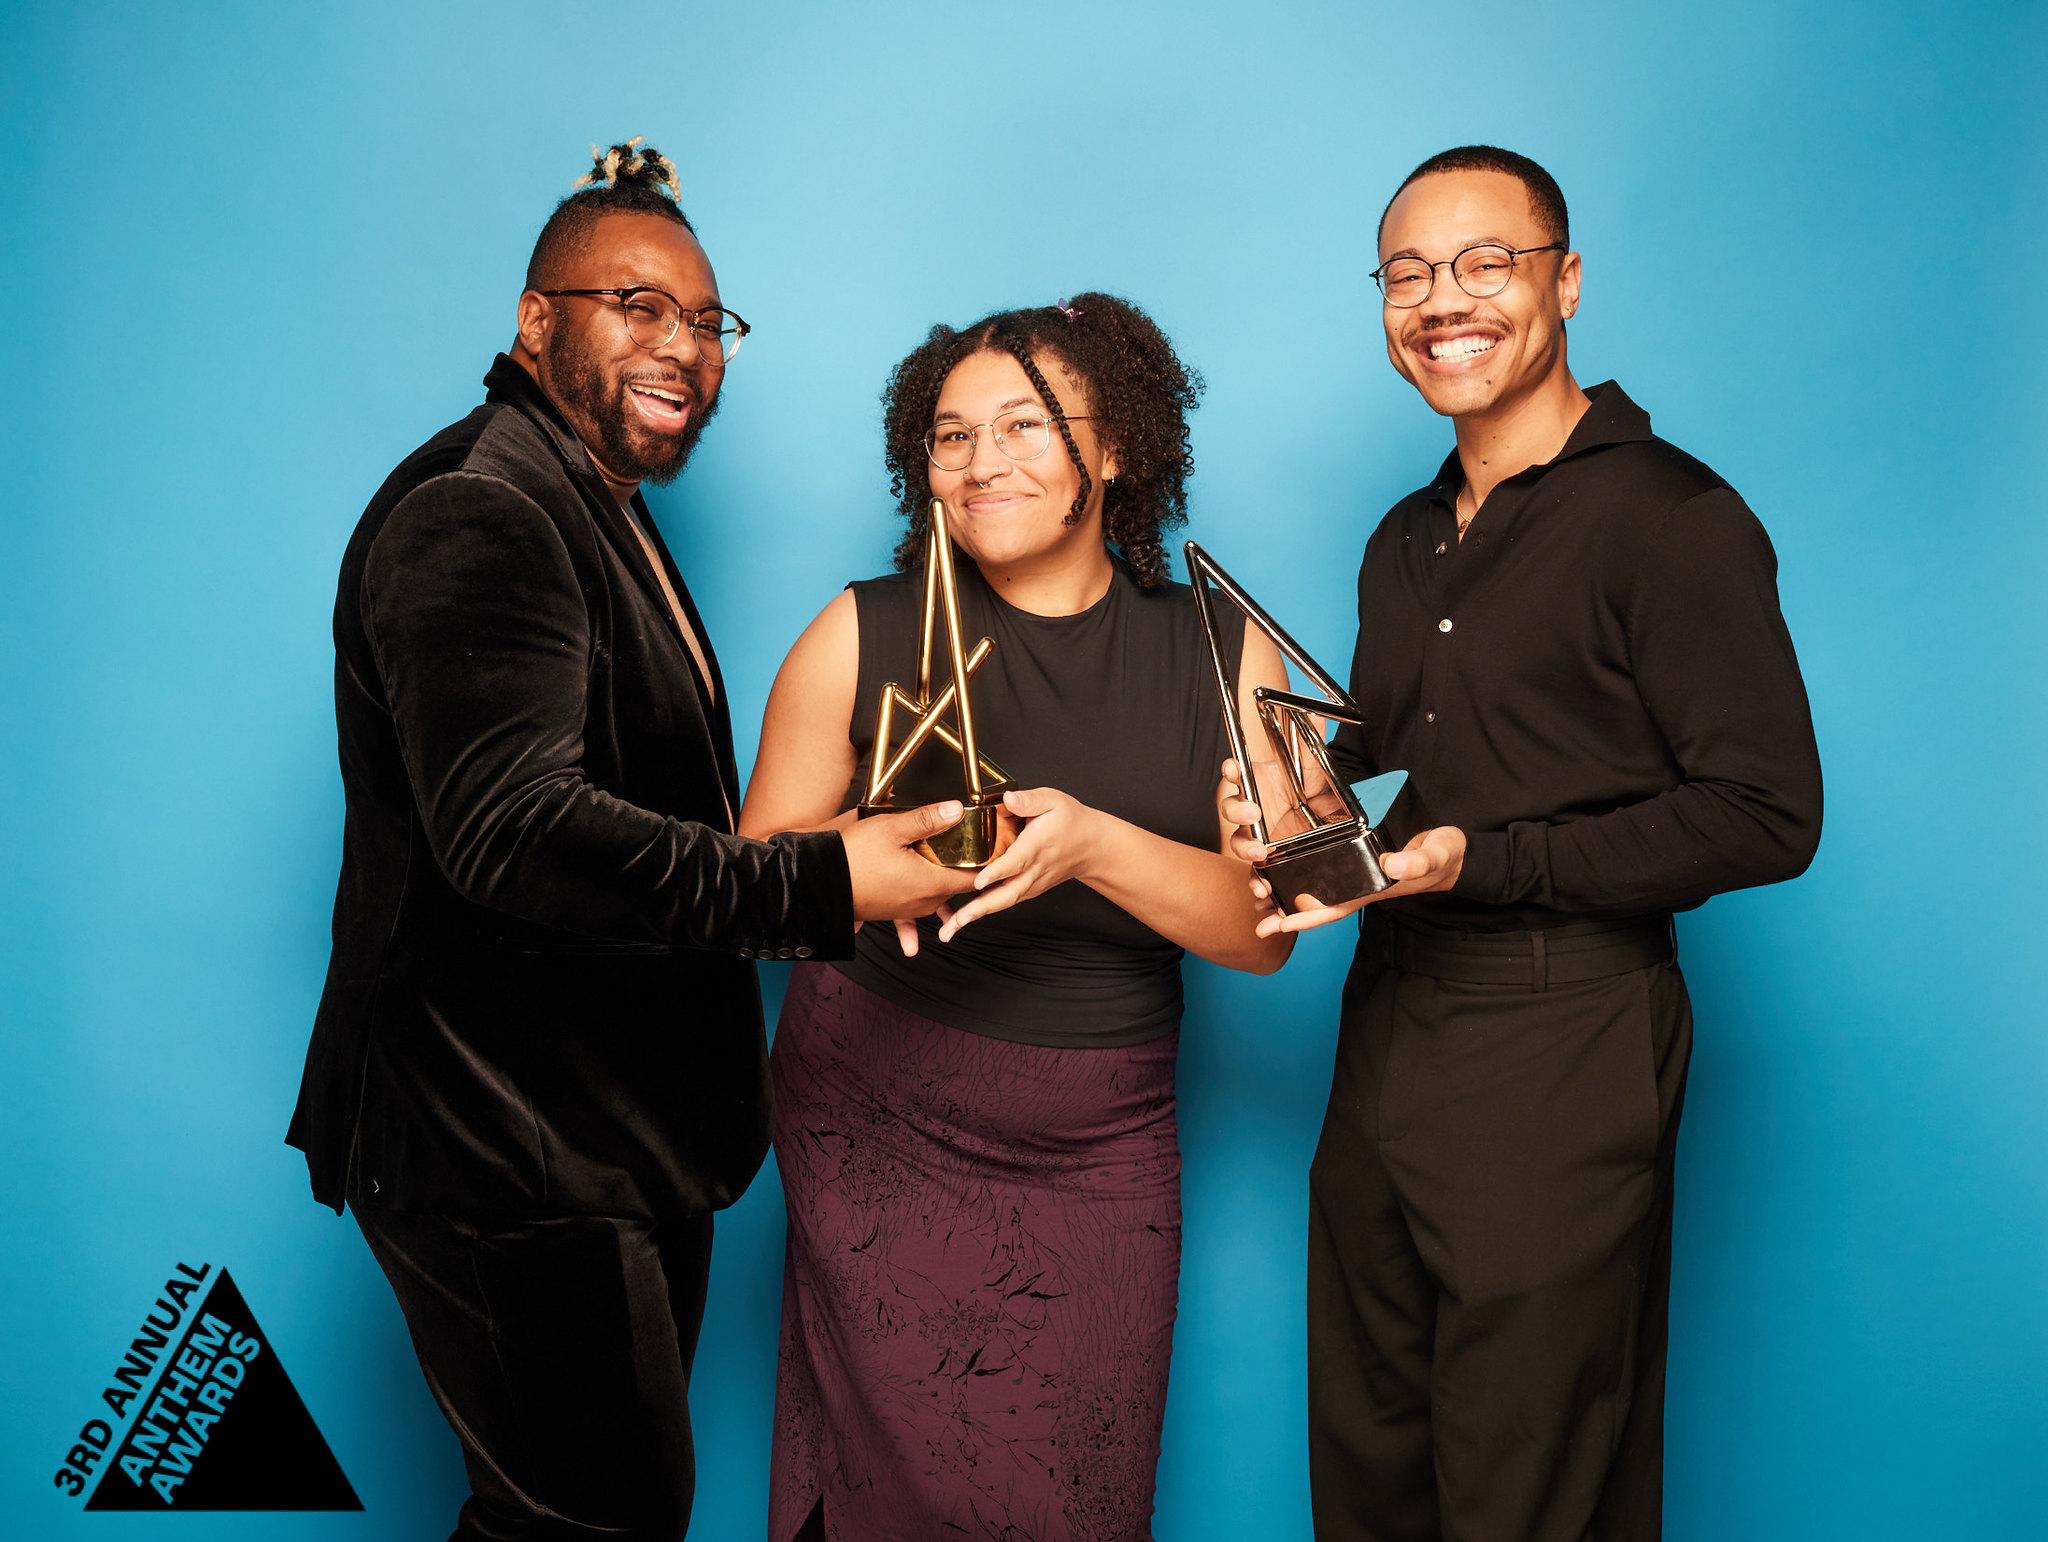 Text description: Three representatives from GLAAD at the 3rd Annual Anthem Awards. They are wearing black suits, holding a trophy in front of a blue backdrop.